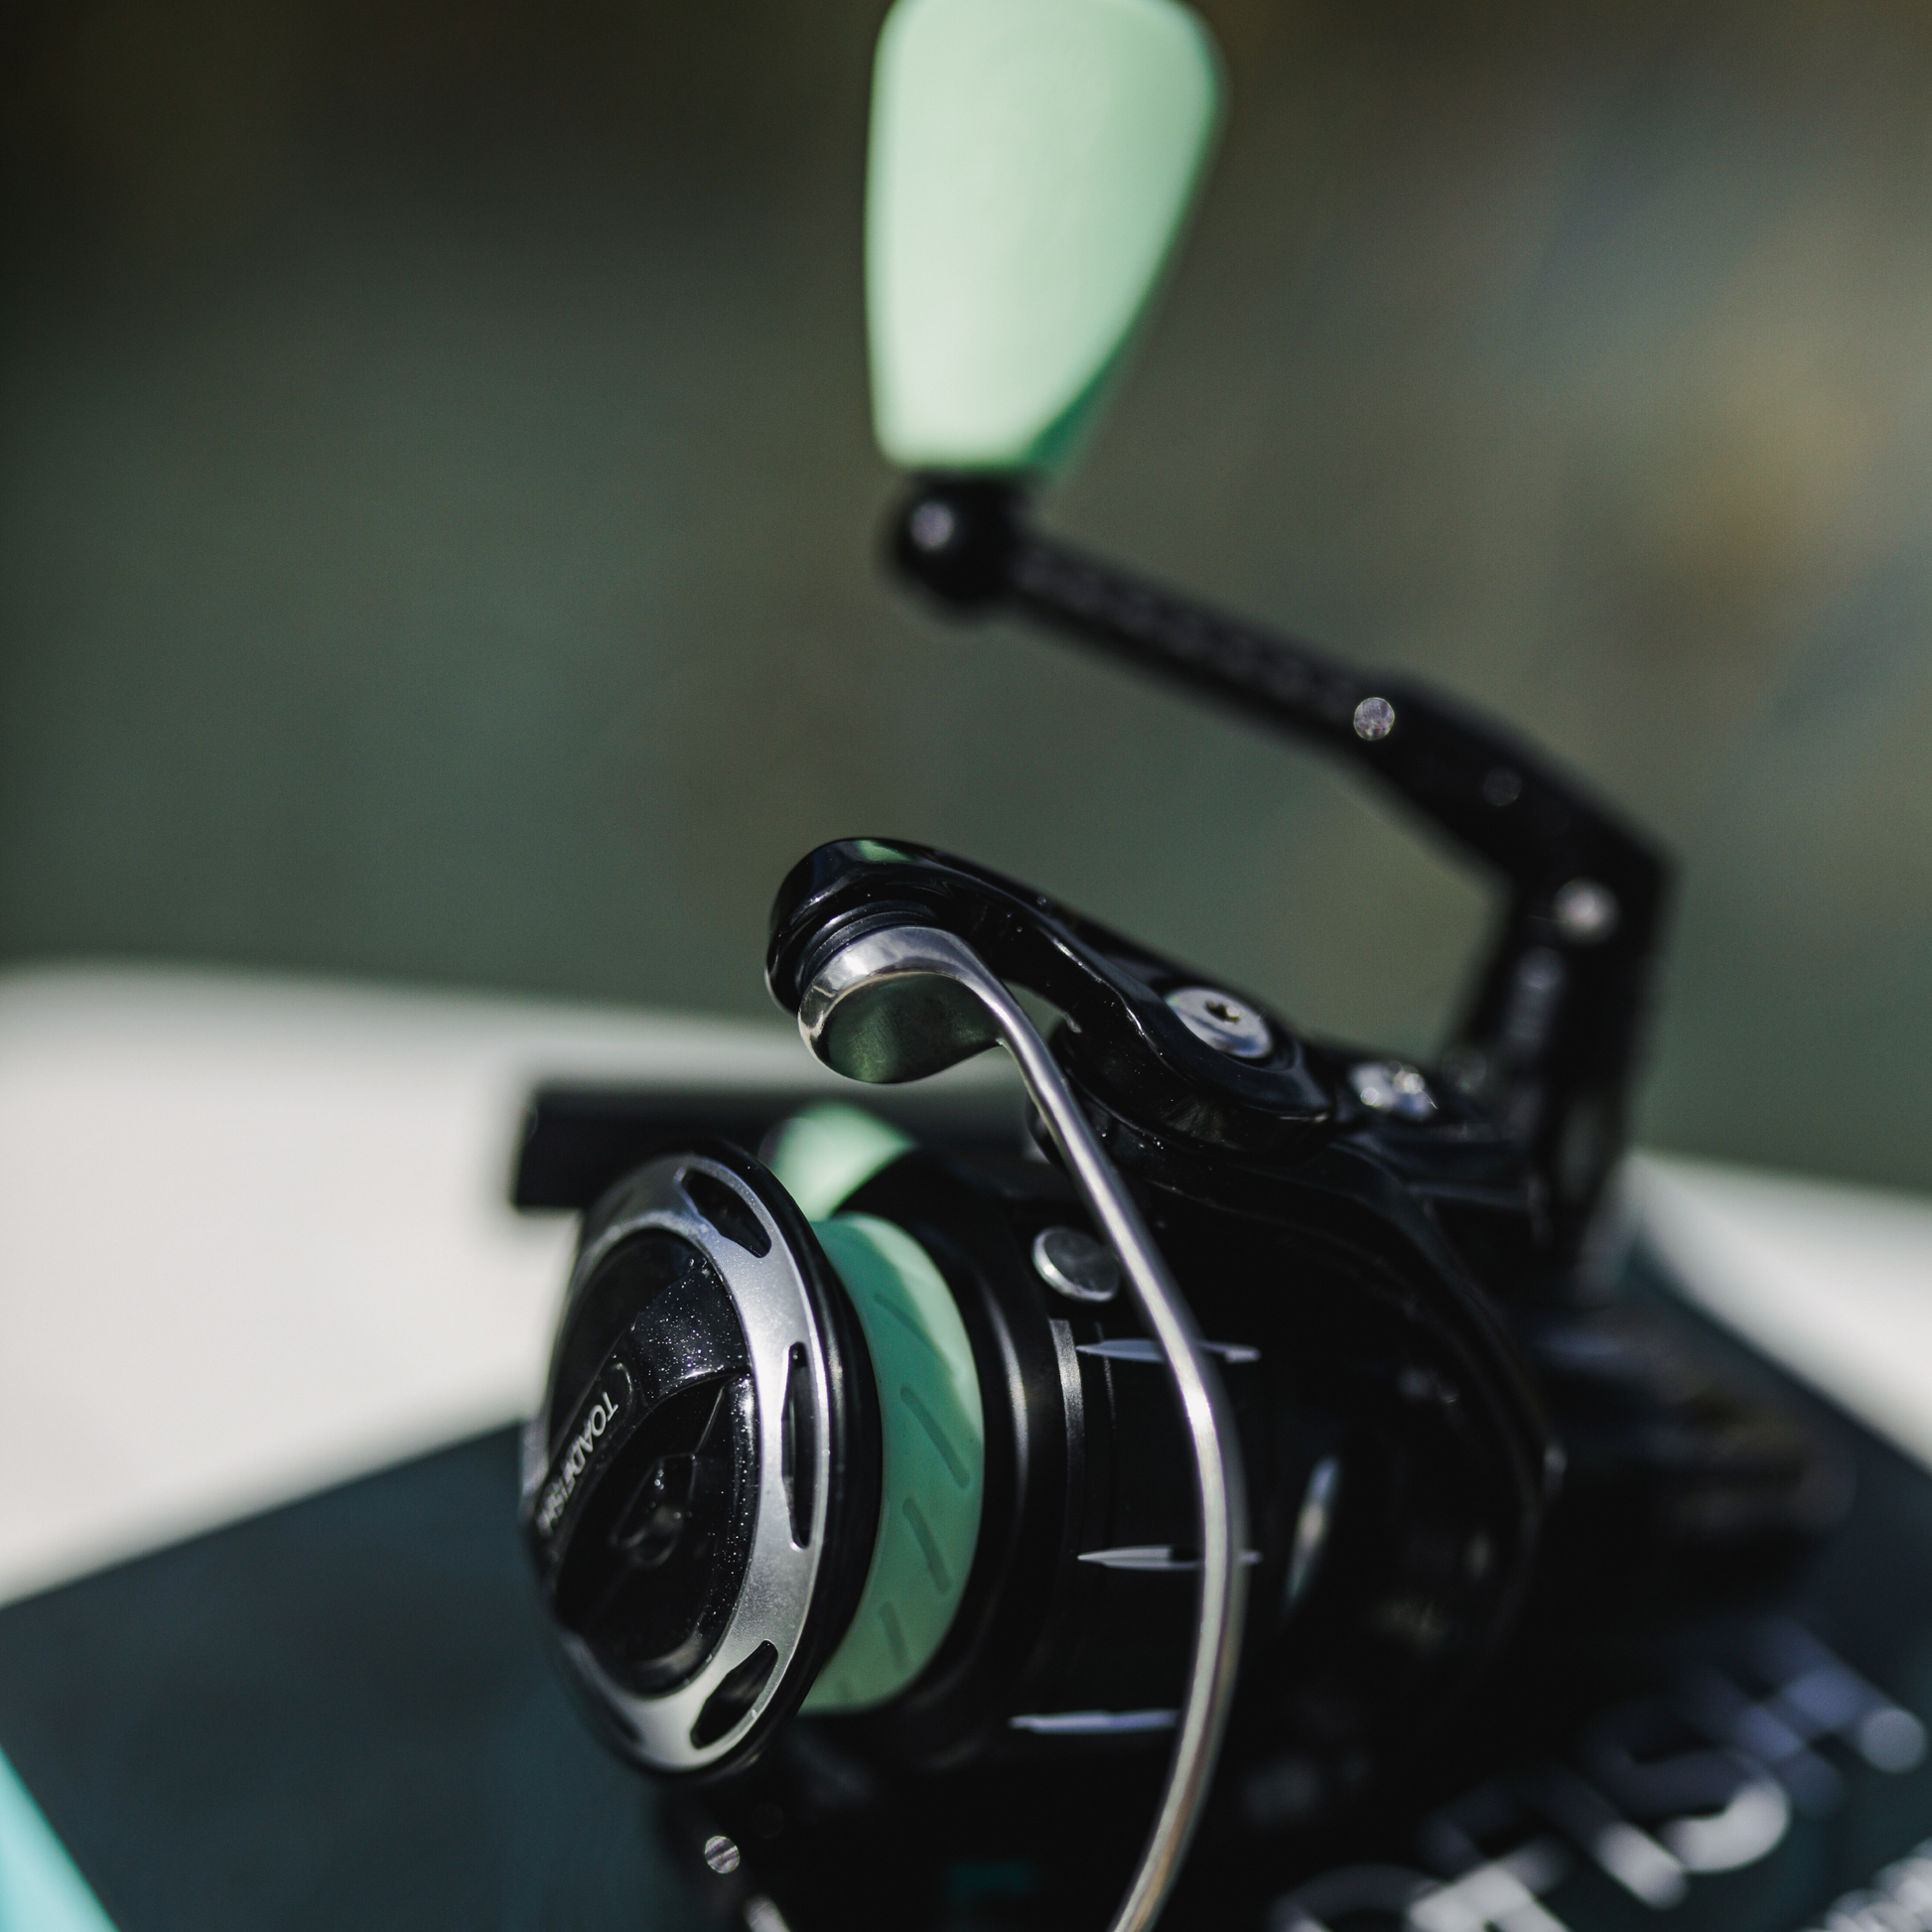 Elite Carbon Series 2000 Spinning Reel - Seagrass - Toadfish - Fishing Rods